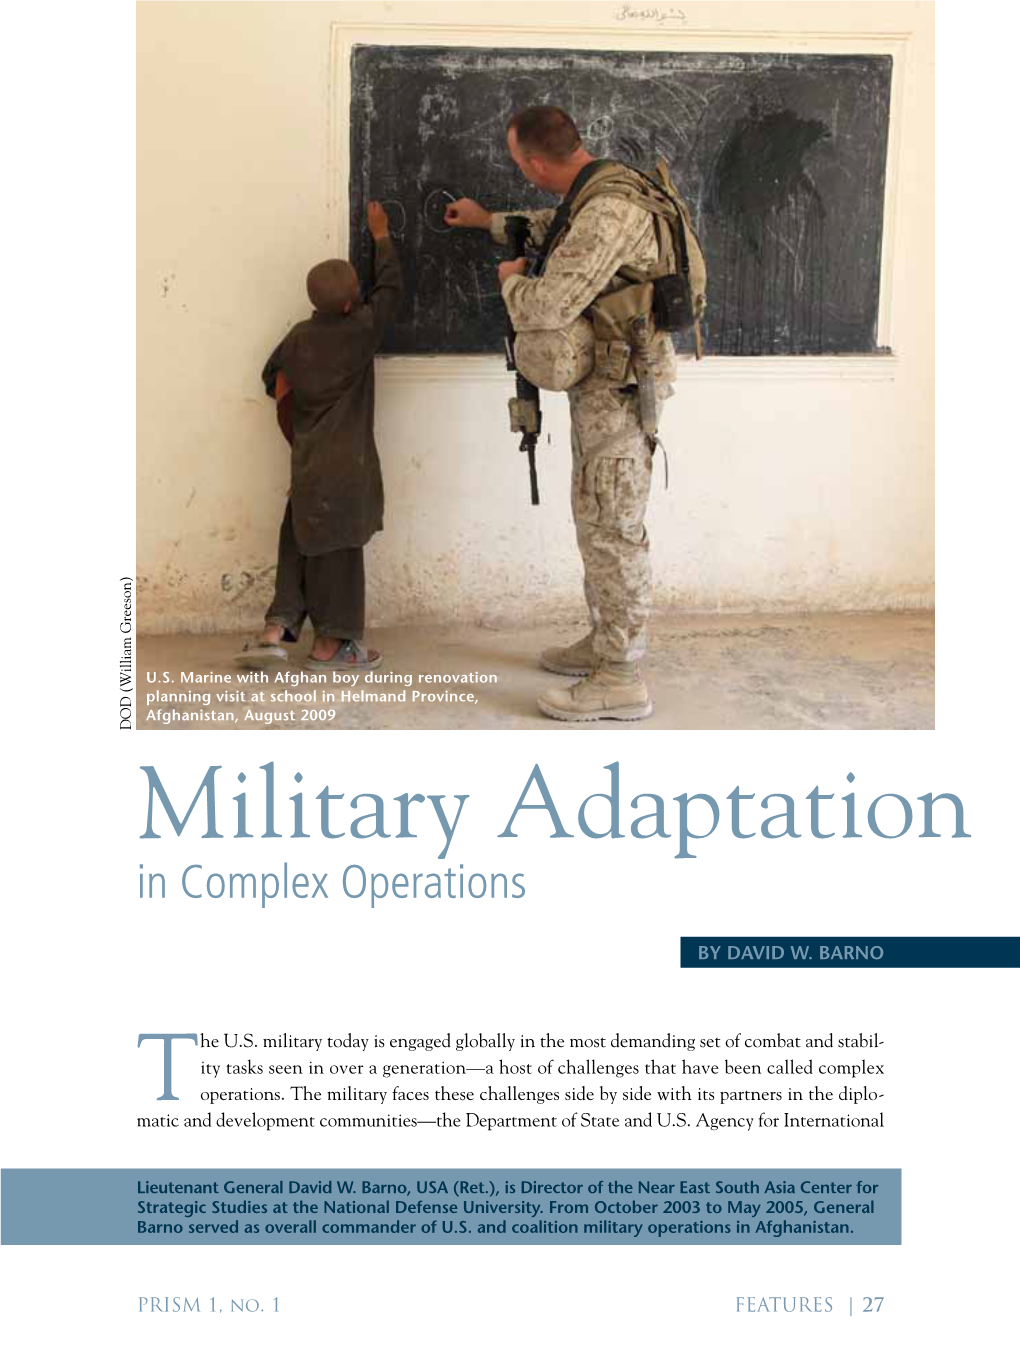 Military Adaptation in Complex Operations